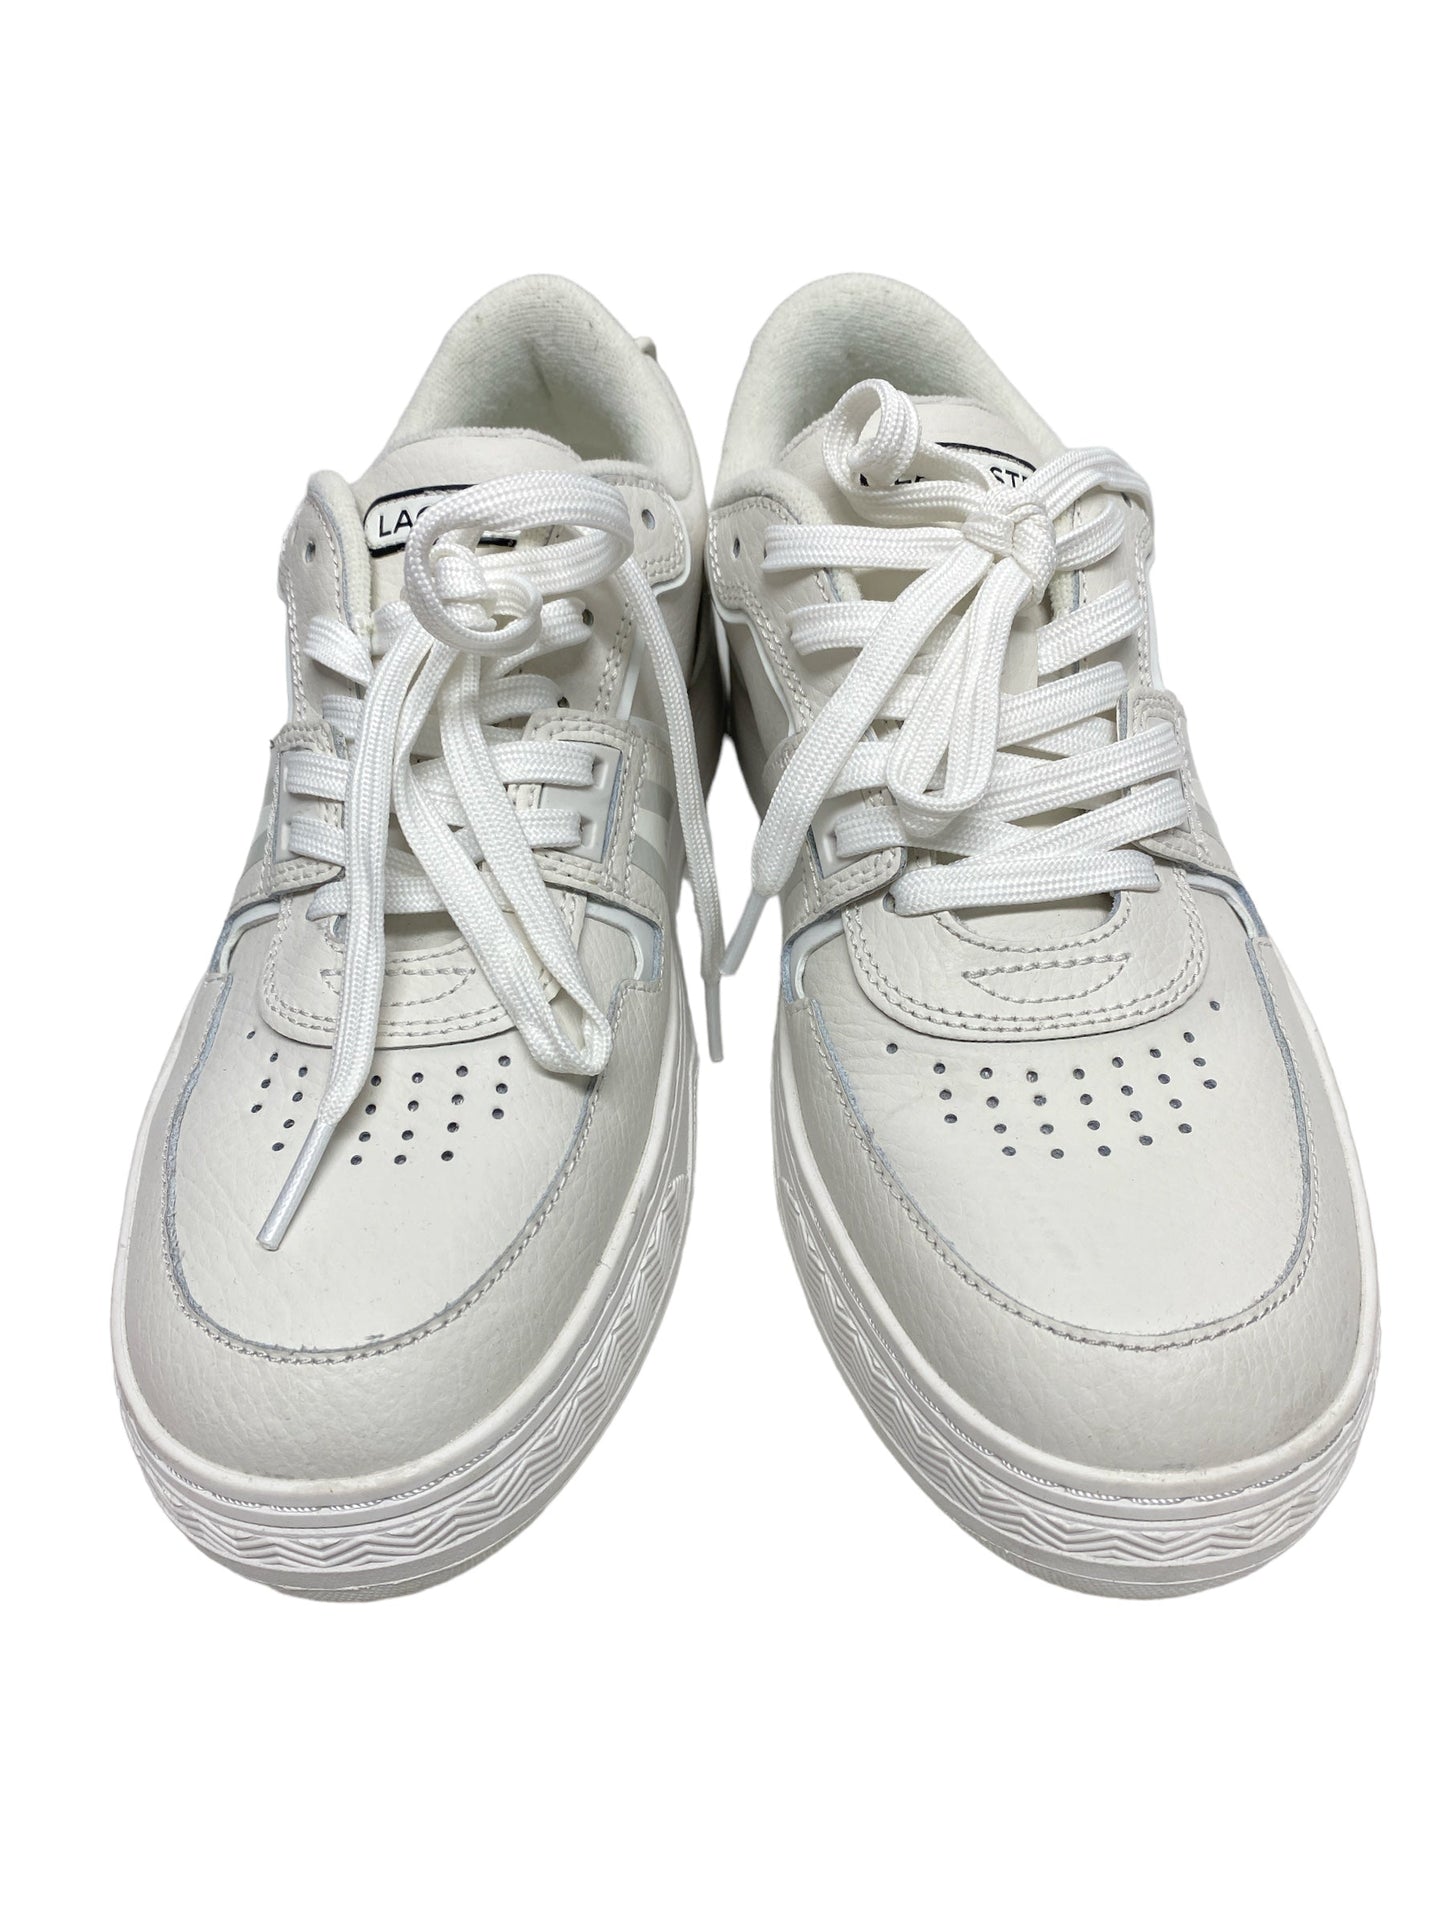 White Shoes Sneakers Lacoste, Size 8